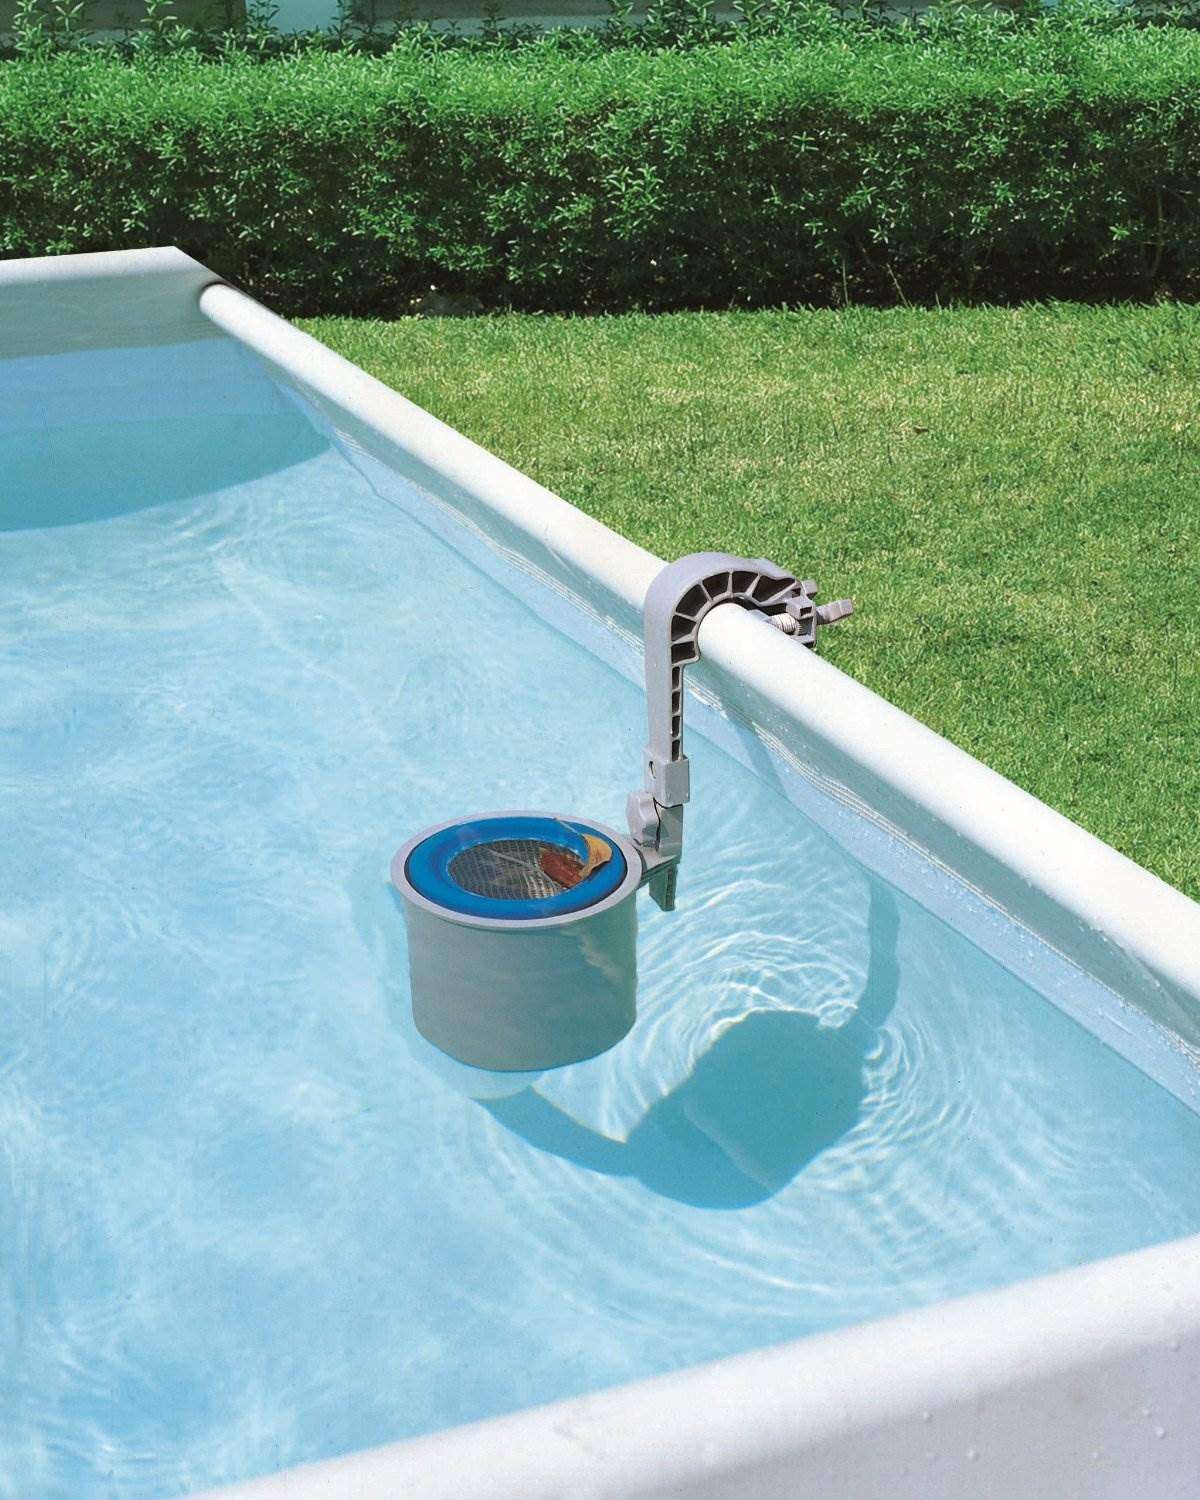 Best Above Ground Pool Skimmer Reviews: 7 Top Picks of 2020